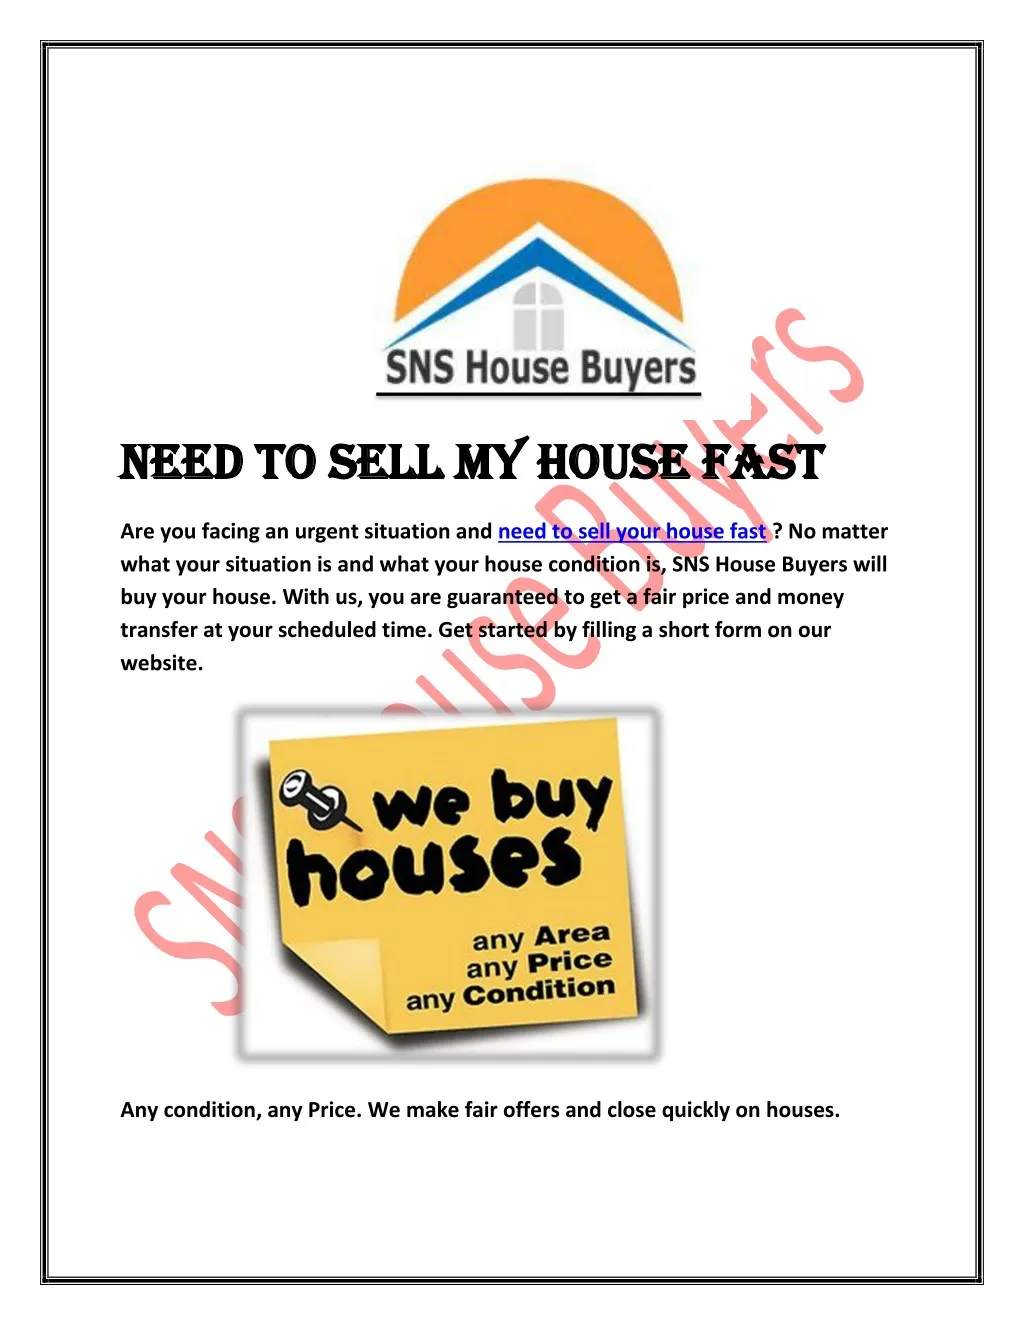 need to sell my house fast need to sell my house